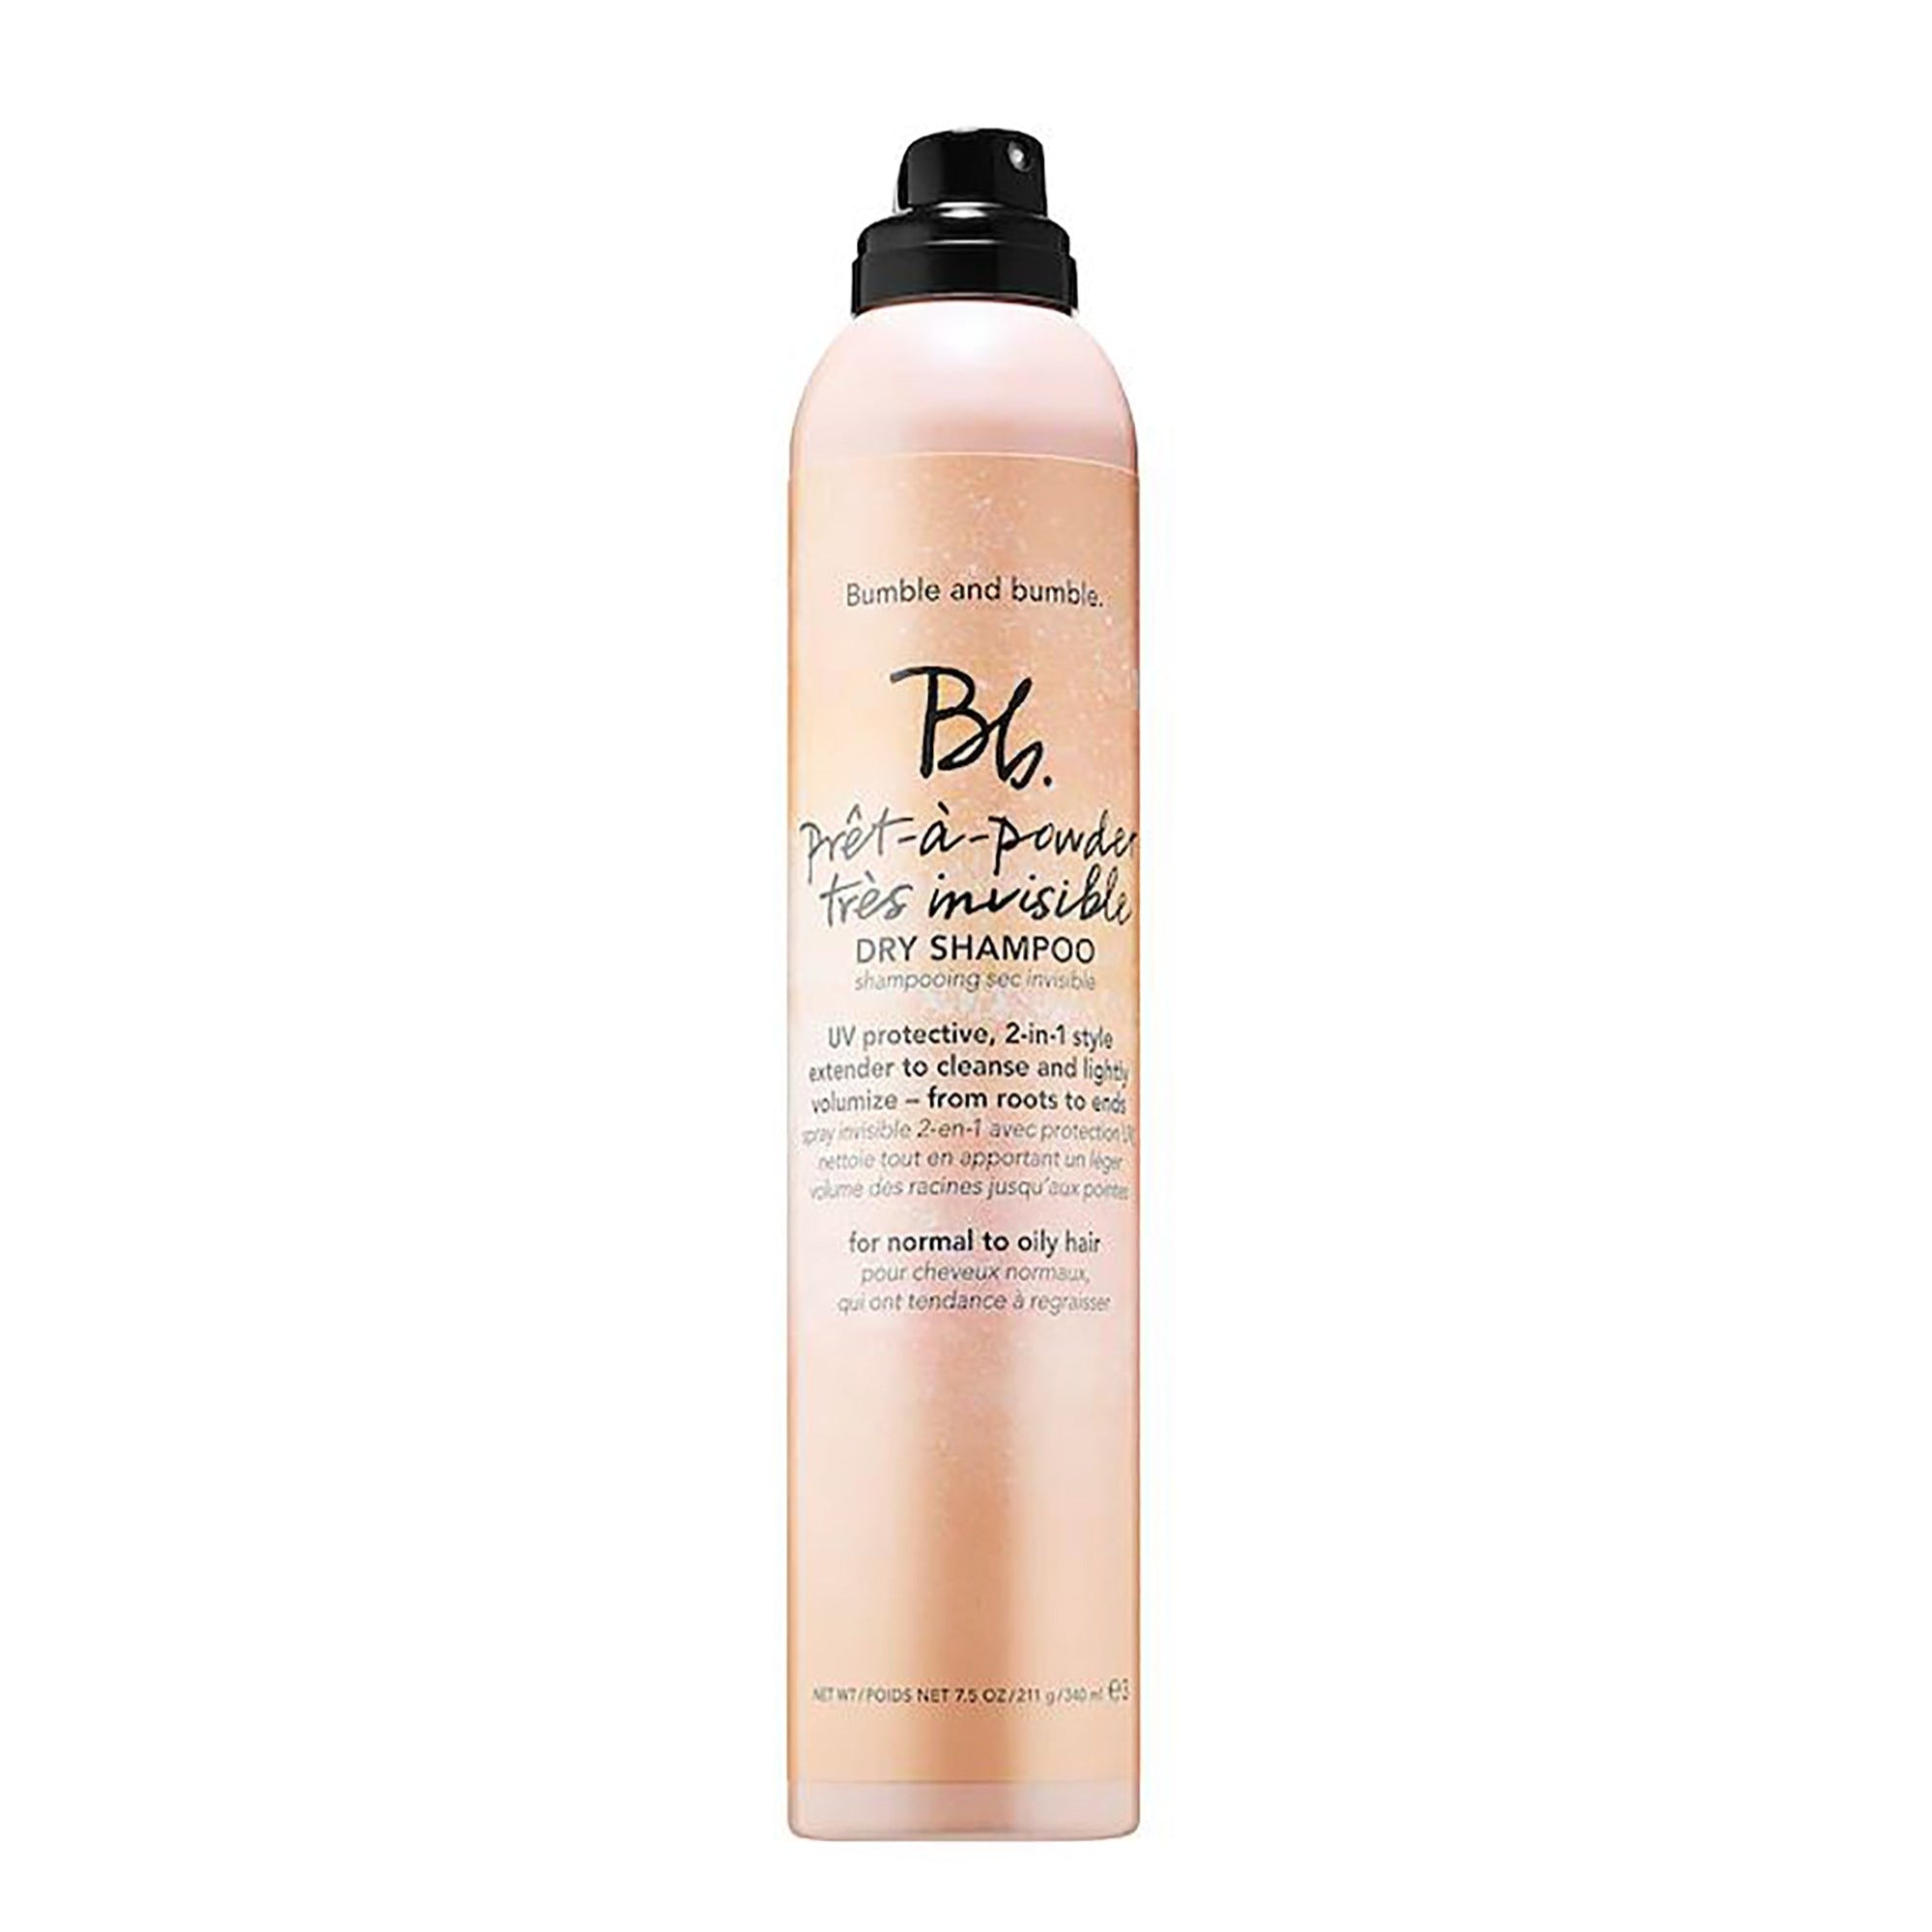 Bumble and bumble Pret-a-Powder Tres Invisible Dry Shampoo / 7.5OZ